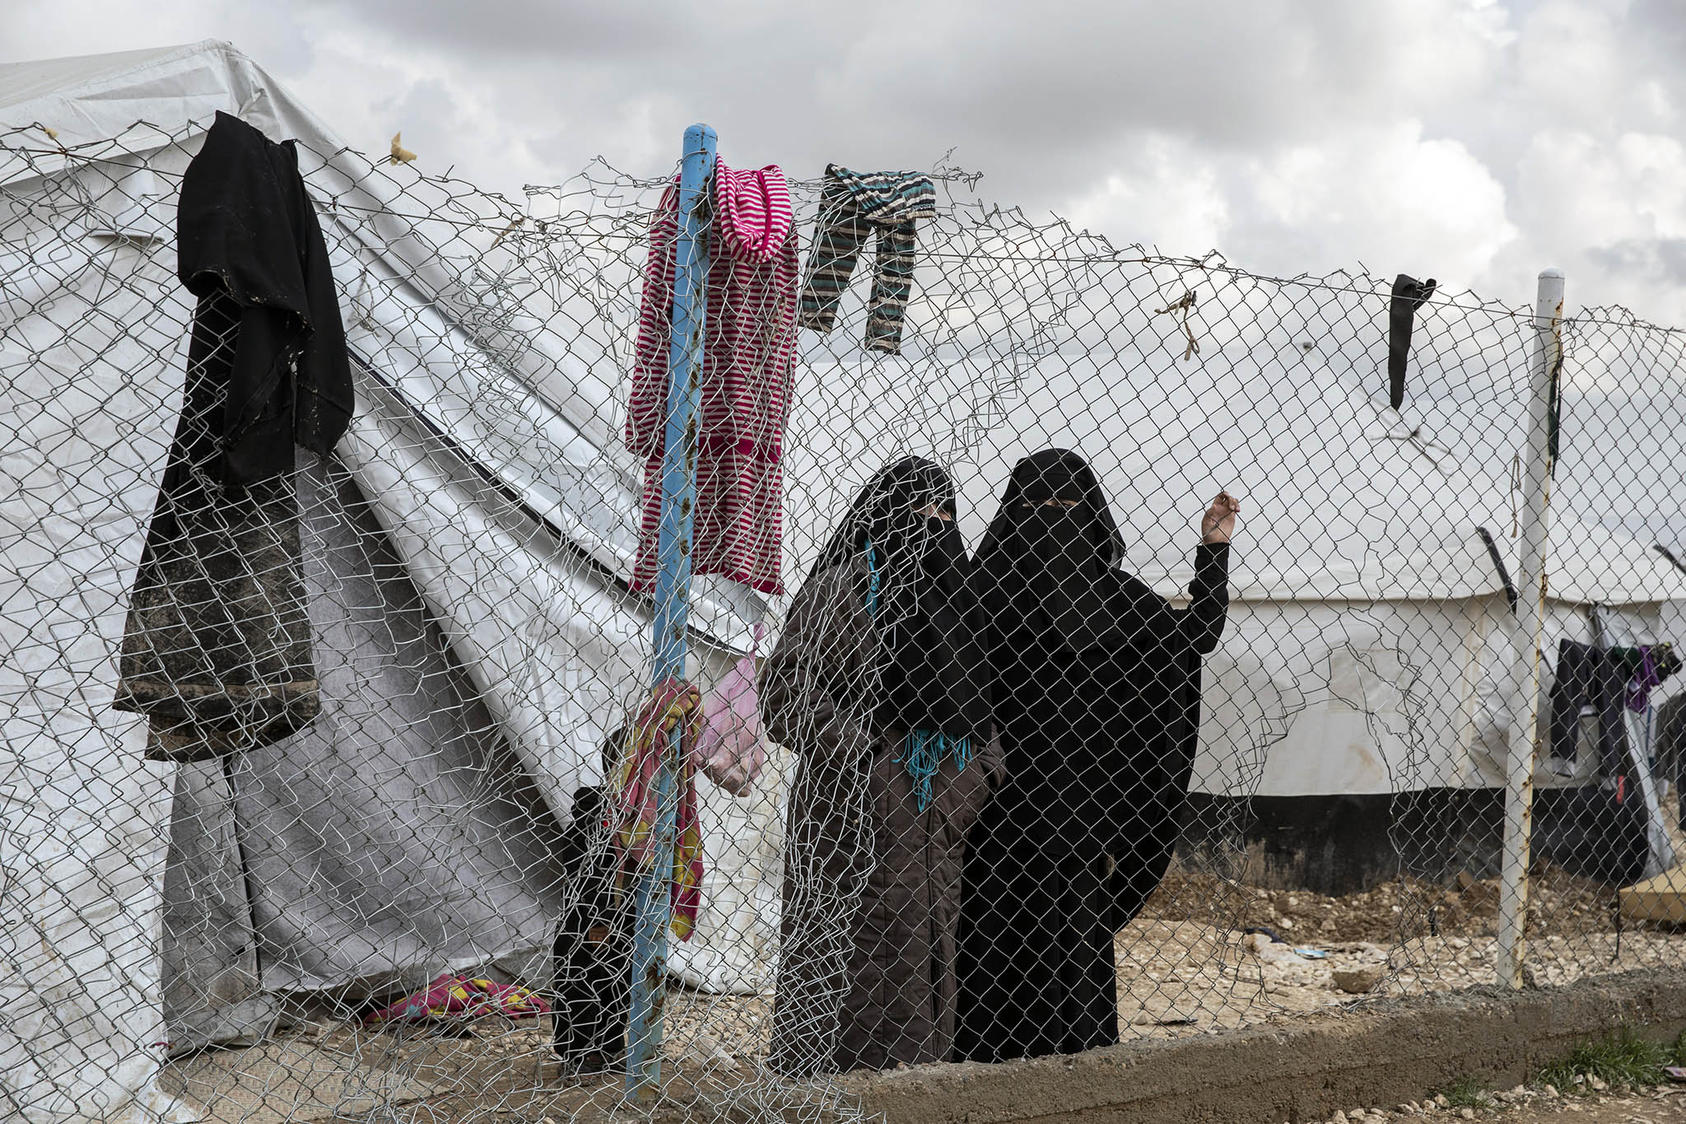 Women who fled the Islamic State’s last areas of control in Syria at the al-Hol camp in northern Syria on March 28, 2019. (Ivor Prickett/The New York Times)